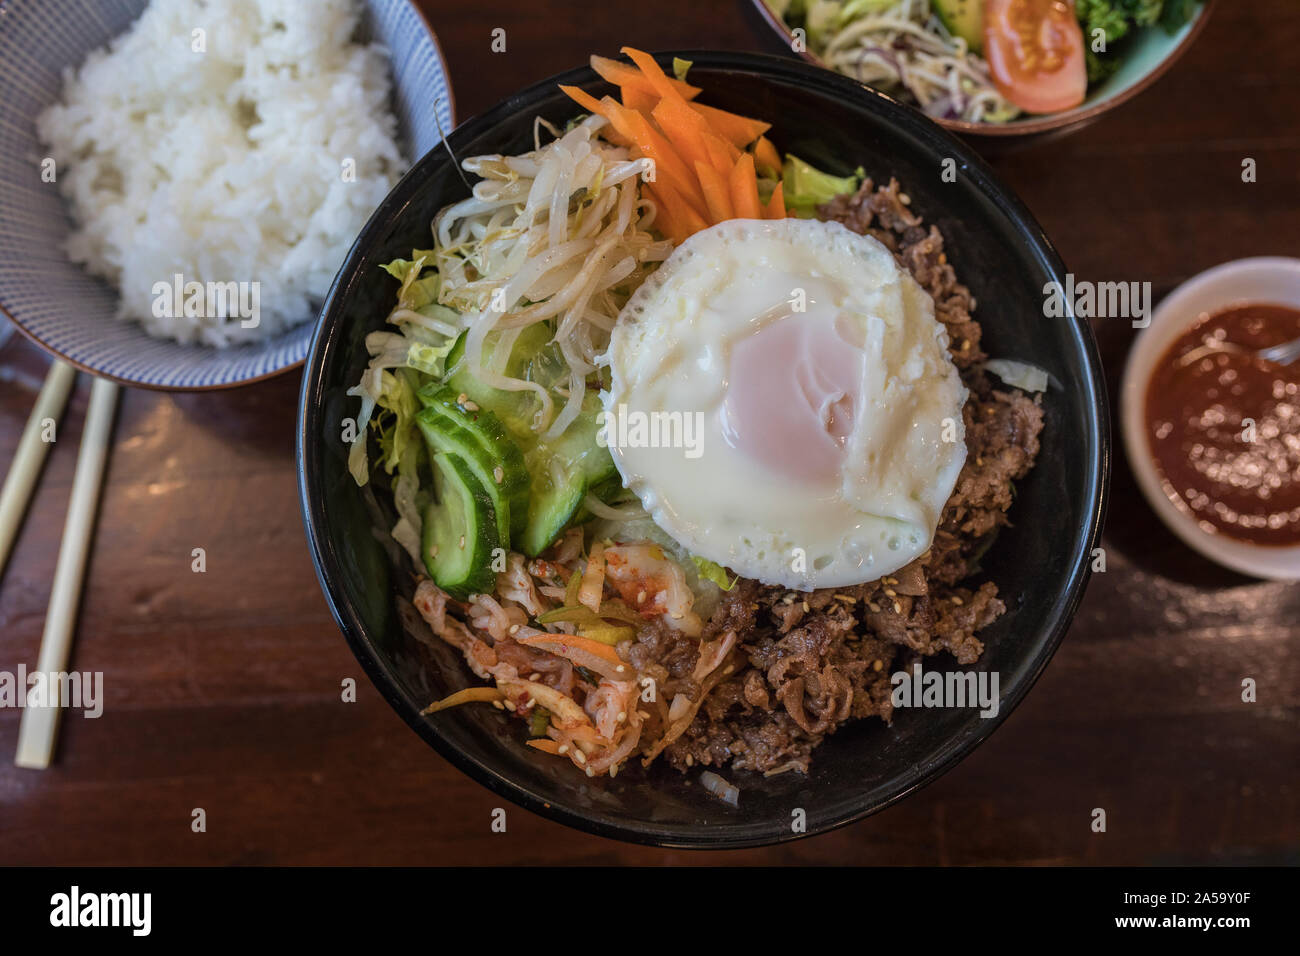 Organic korean Bi bim bap dish with rice, cucumber, beef,kochujang sauce, bean sprouts and carrots in a healthy meal on a table with other asian food Stock Photo